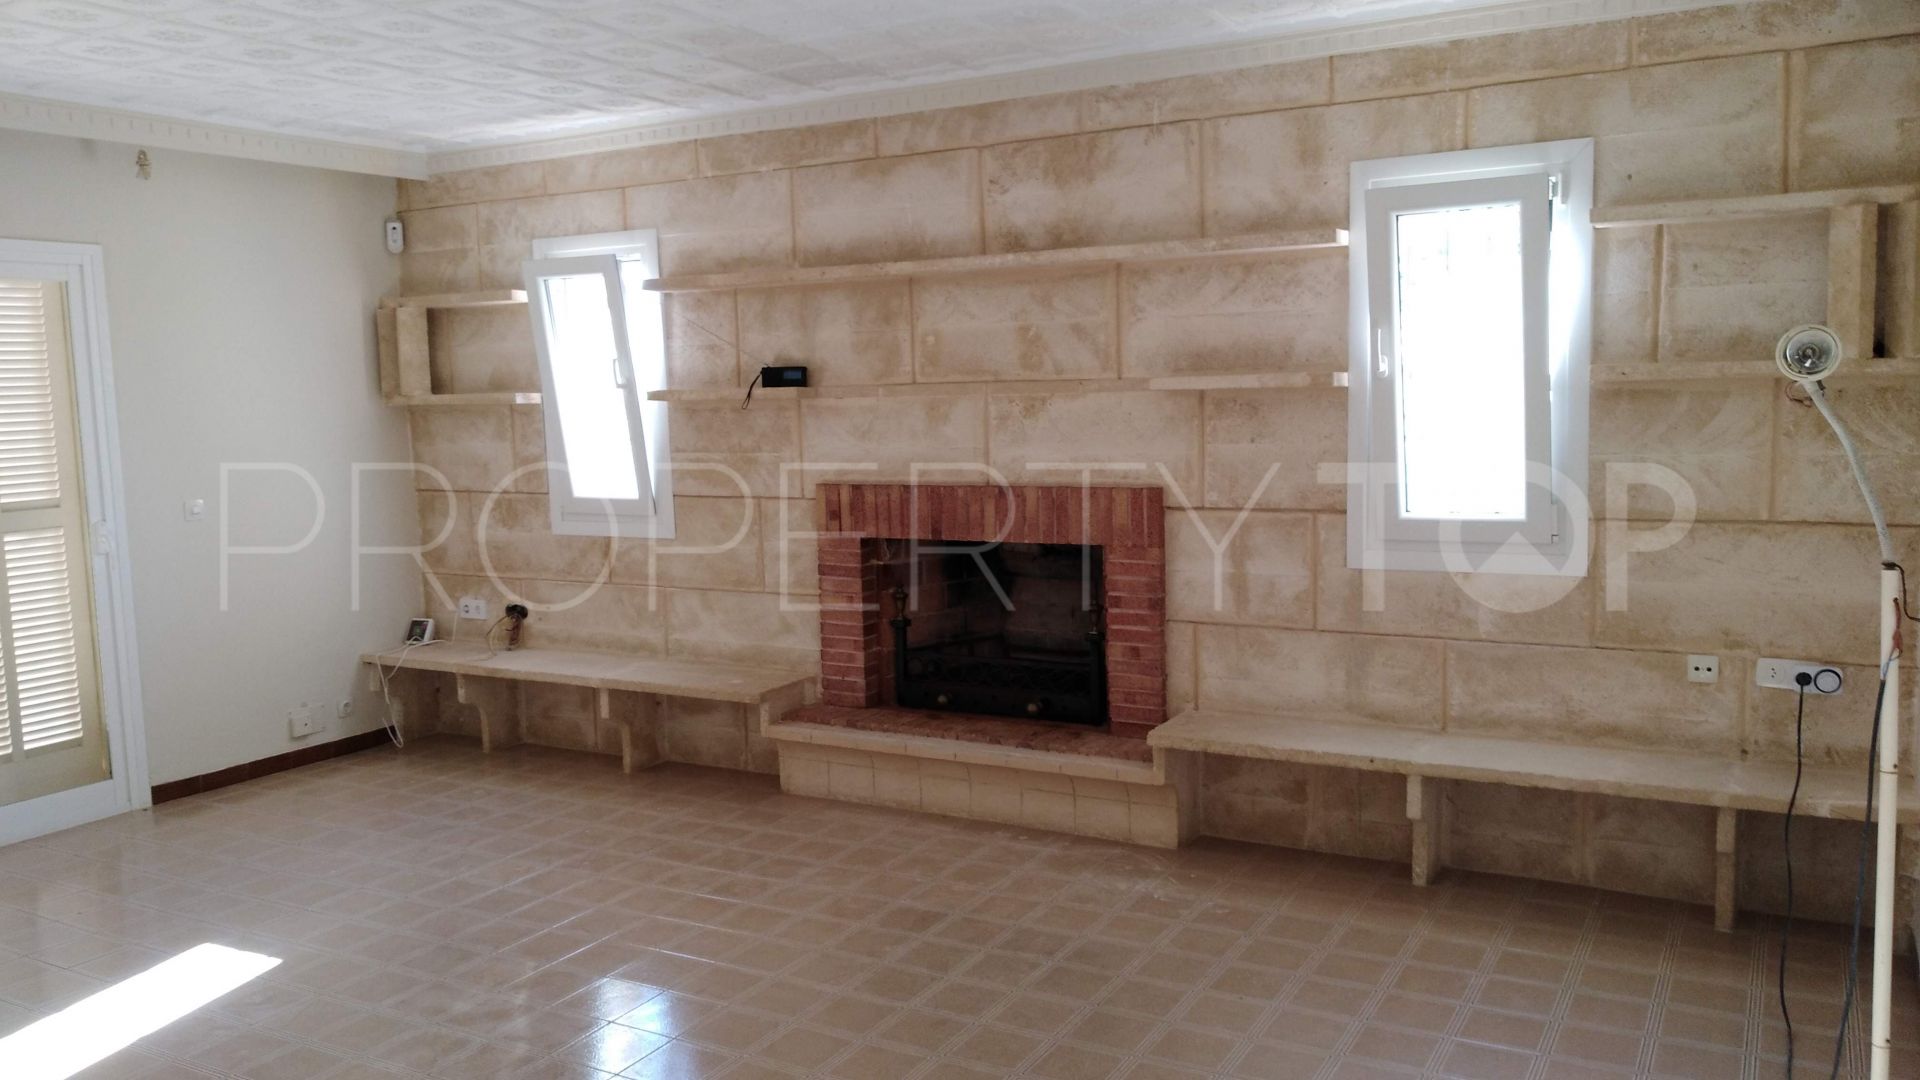 For sale 5 bedrooms house in Bunyola